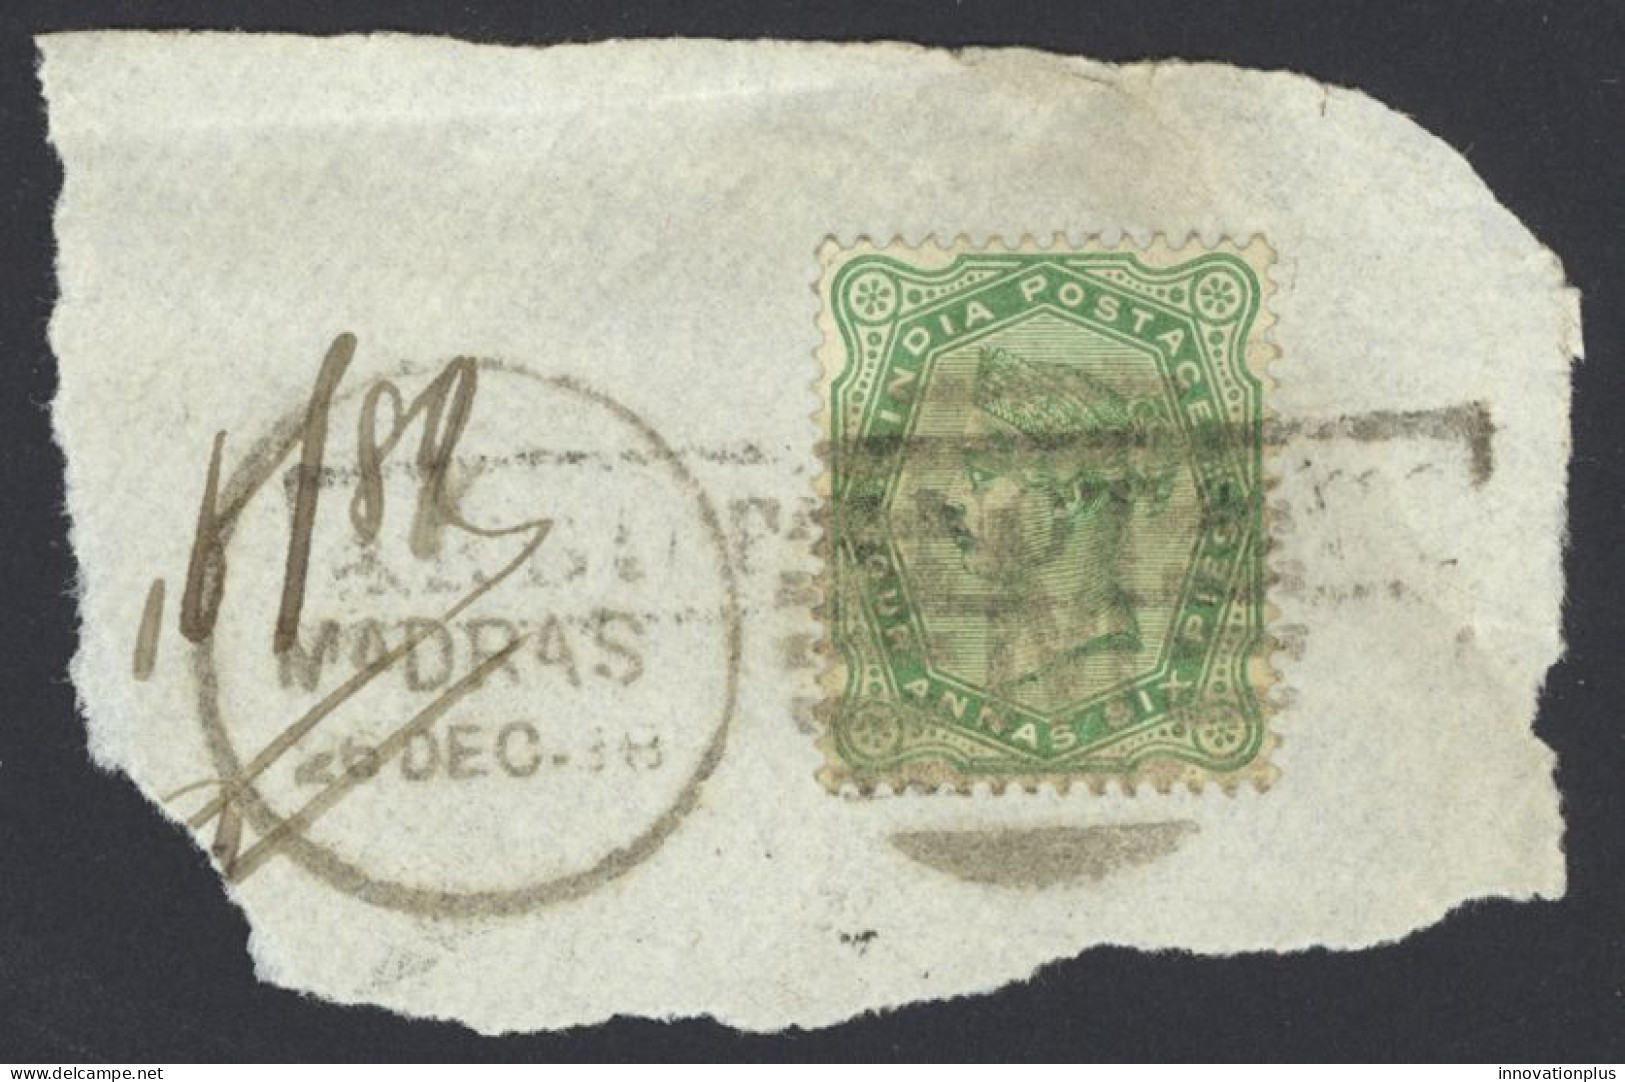 India Sc# 43 Used (b) On Cover Remnant (26DEC88) 1882-1887 4a6p Queen Victoria  - 1882-1901 Imperio